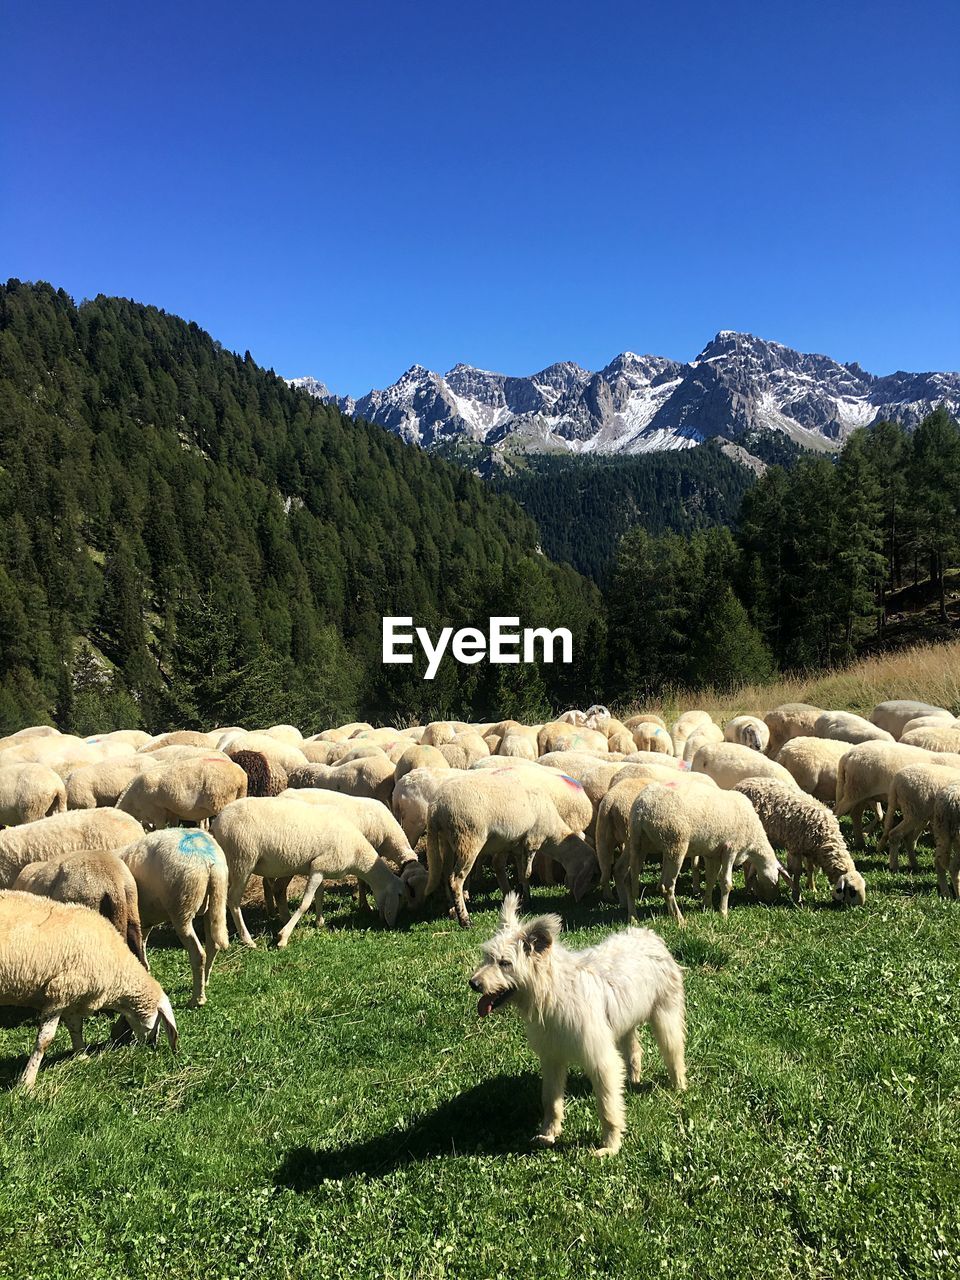 VIEW OF SHEEP ON GRASSY FIELD